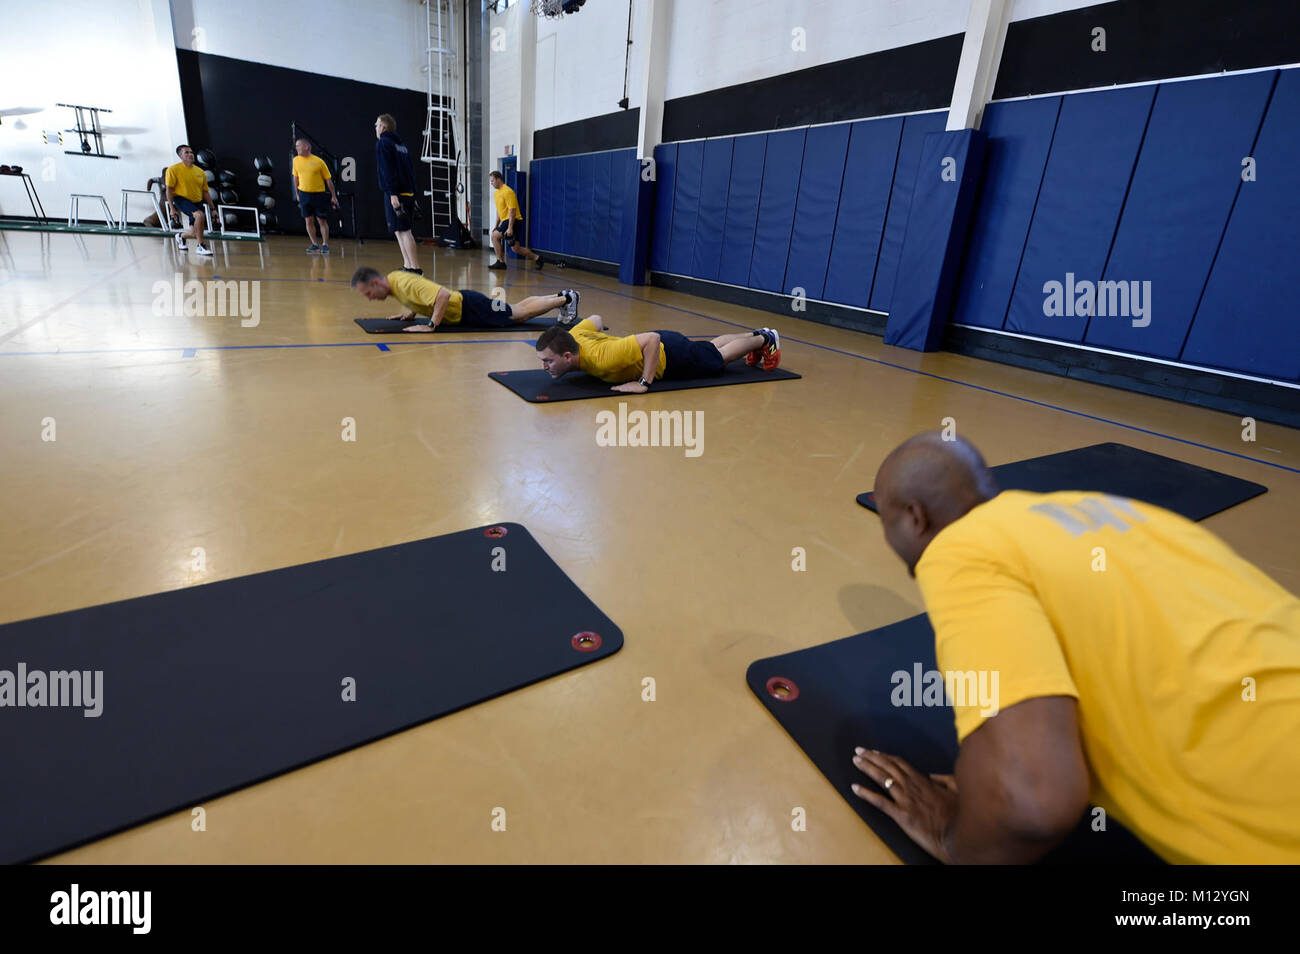 Fla. (Jan. 23, 2018) Center for Information Warfare Training (CIWT) staff participate in command physical fitness session inside the Wenzel Fitness Center on board Naval Air Station Pensacola Corry Station, Florida. CIWT staff takes physical fitness seriously and regularly trains together to maintain readiness. (U.S. Navy Stock Photo